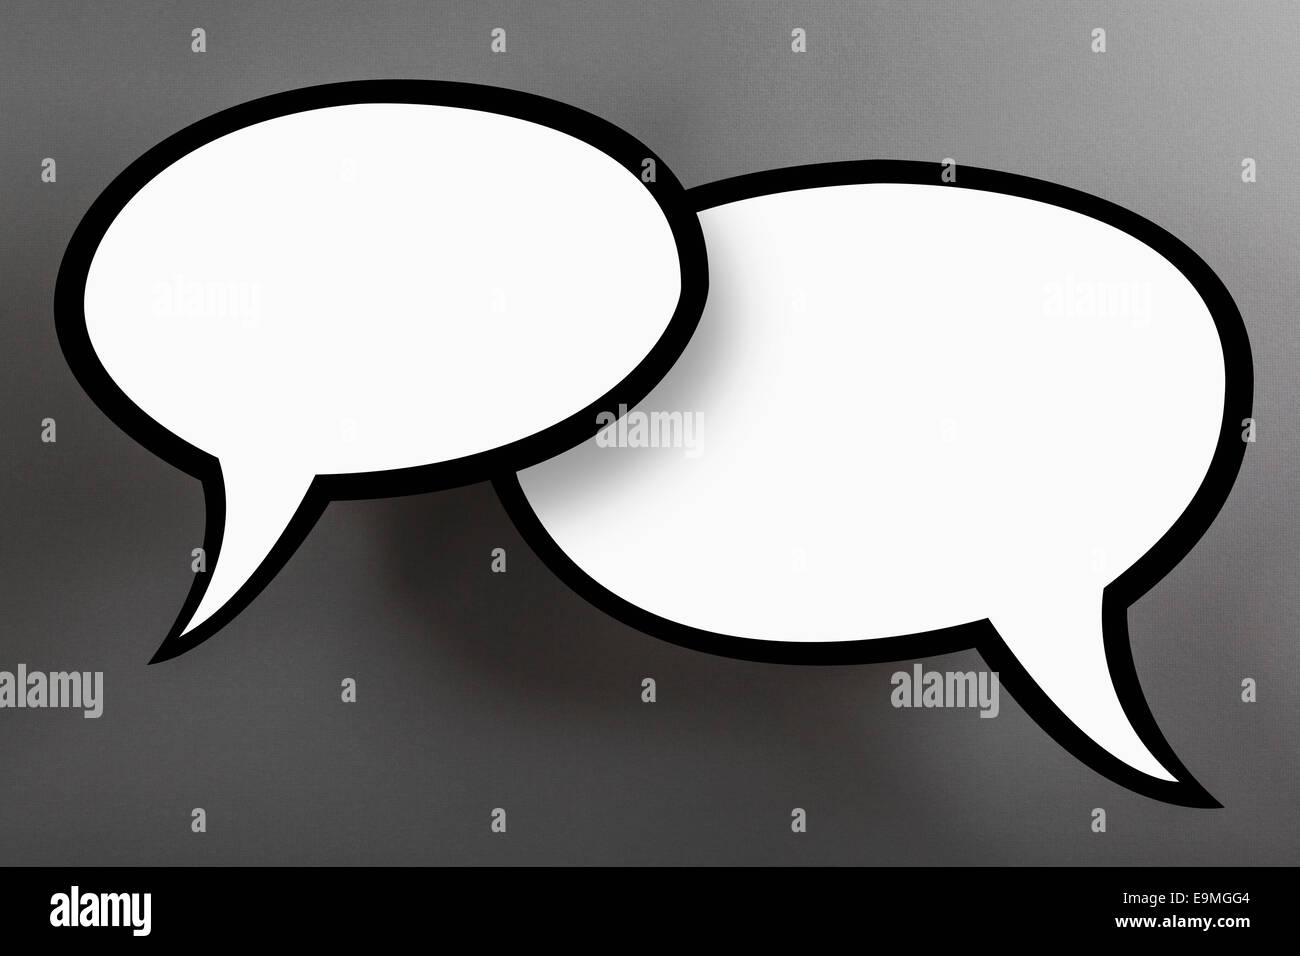 Blank speech bubbles against gray background Stock Photo